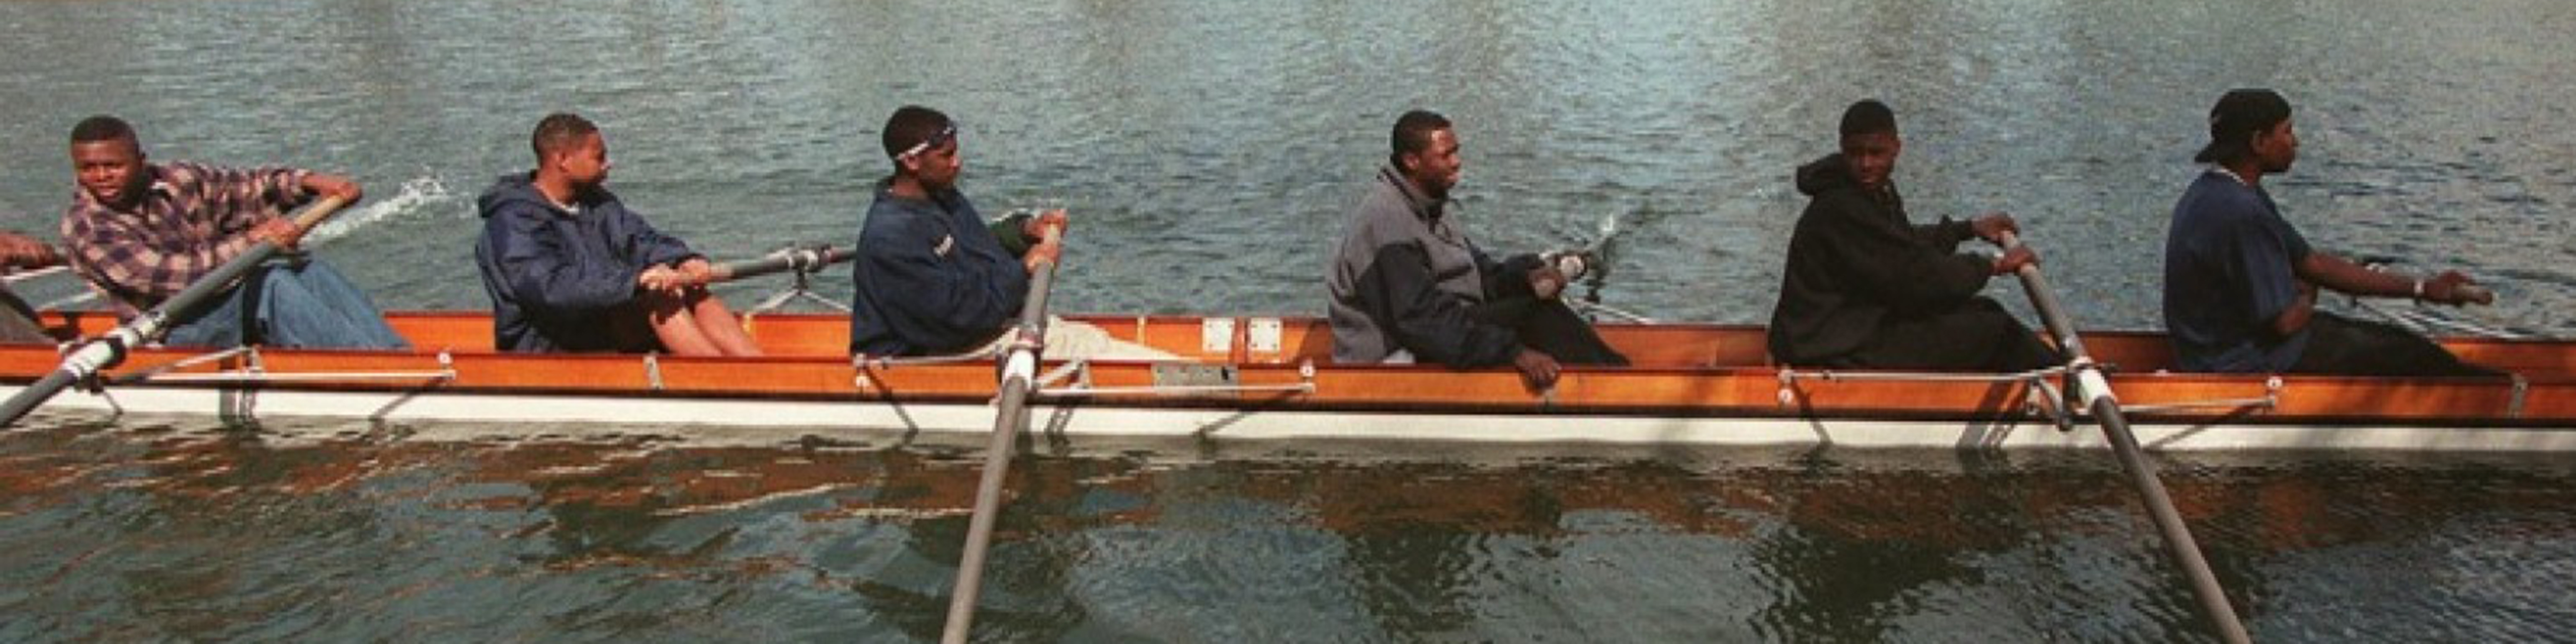 a team of young black men rowing crew